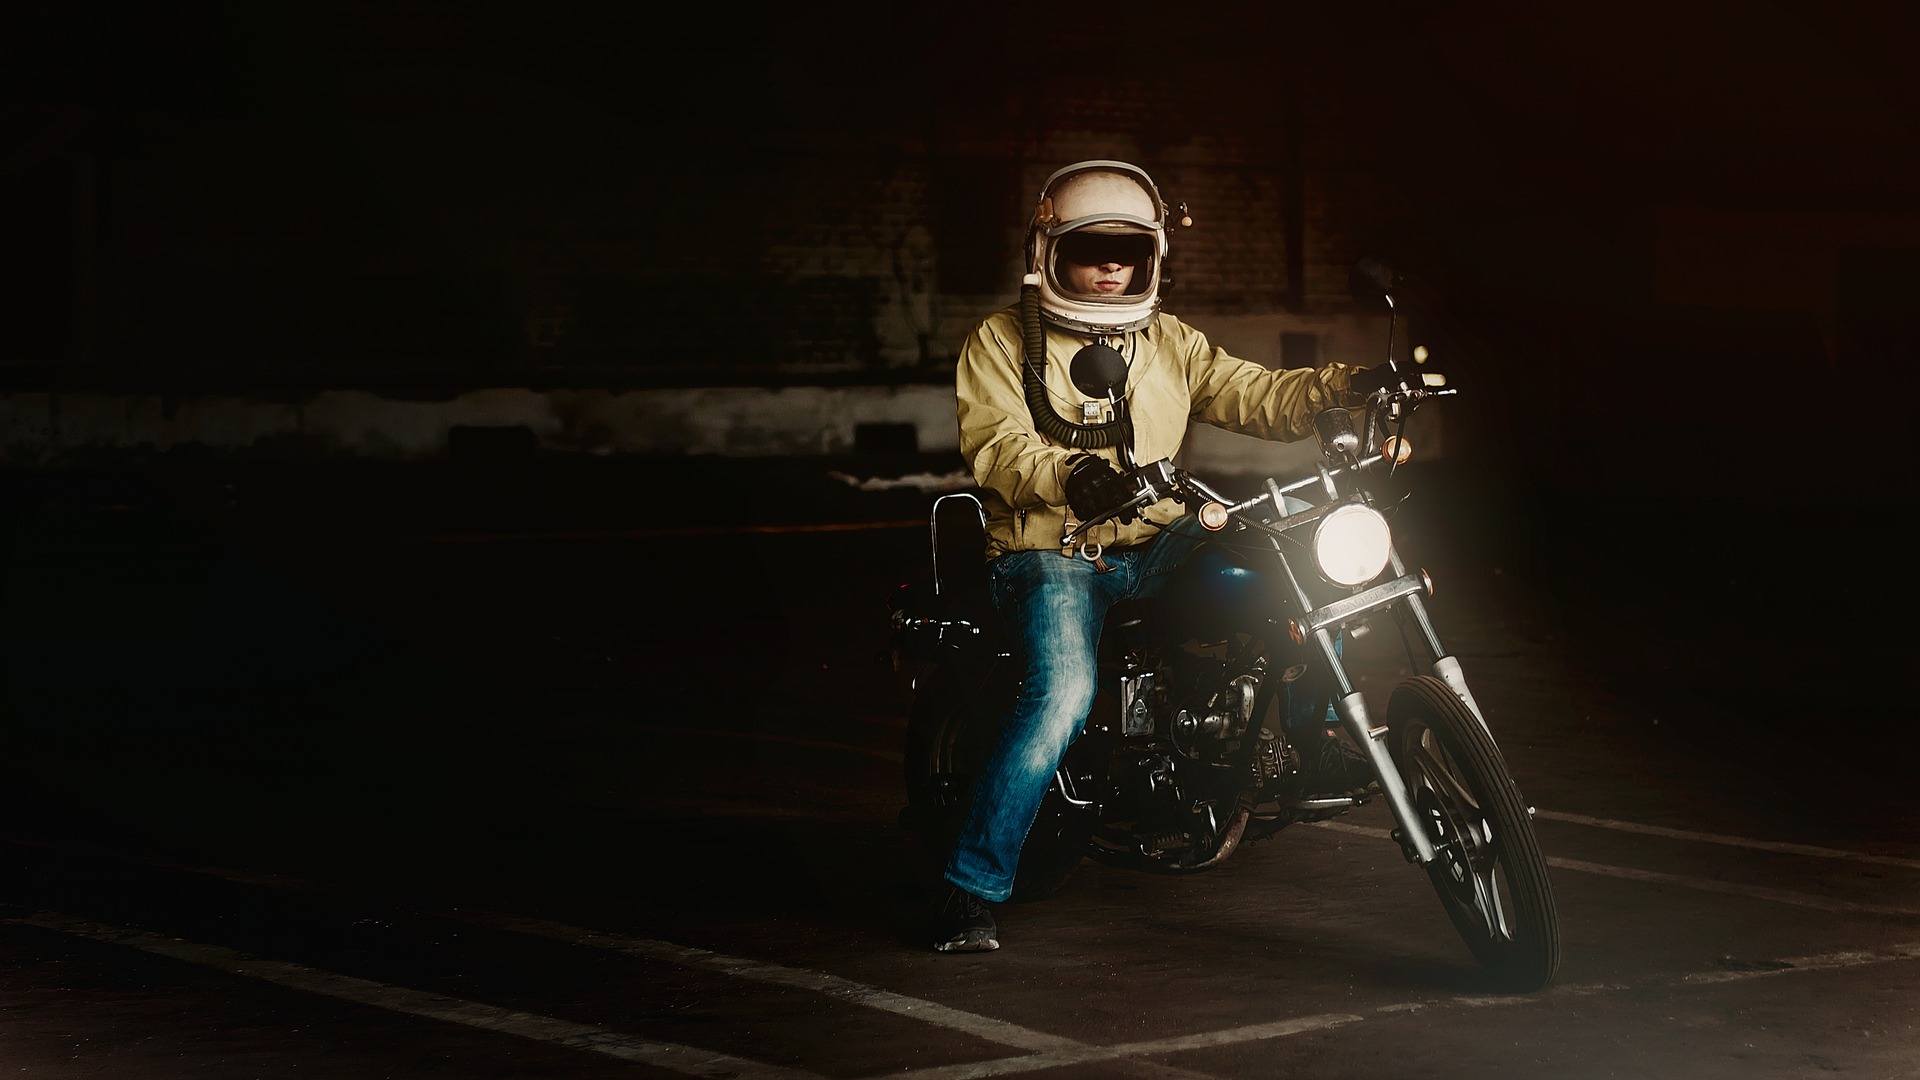 riding a motorcycle in the dark